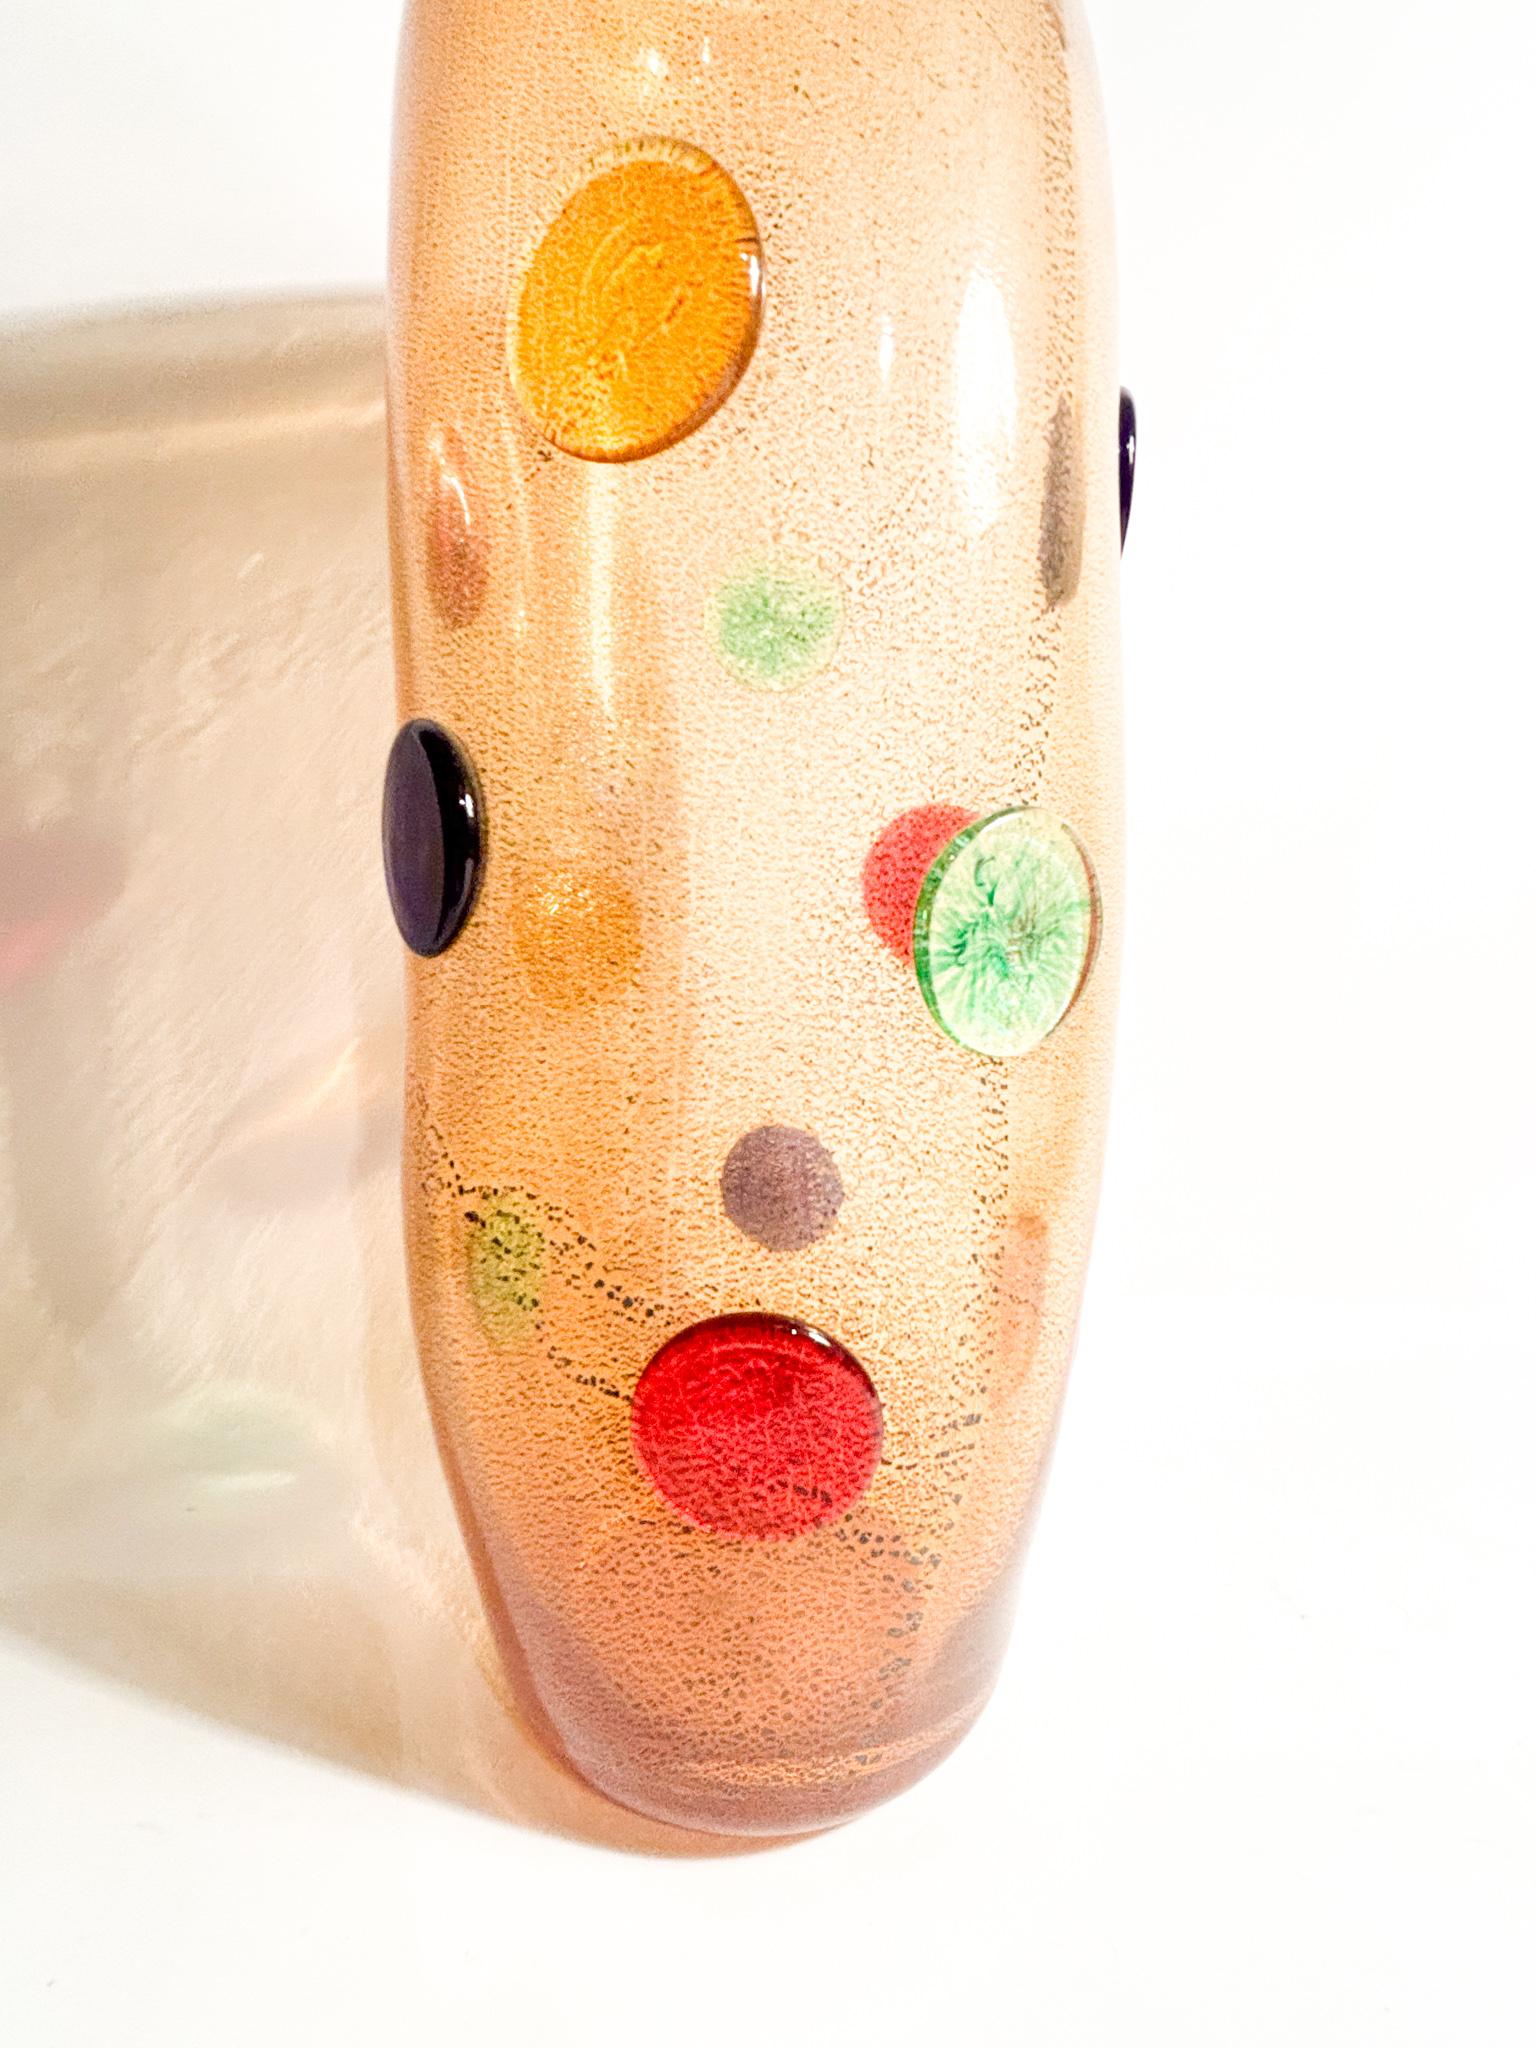 La Murrina Vase in Multicolored Murano Glass with Gold Leaf from the 1980s For Sale 4